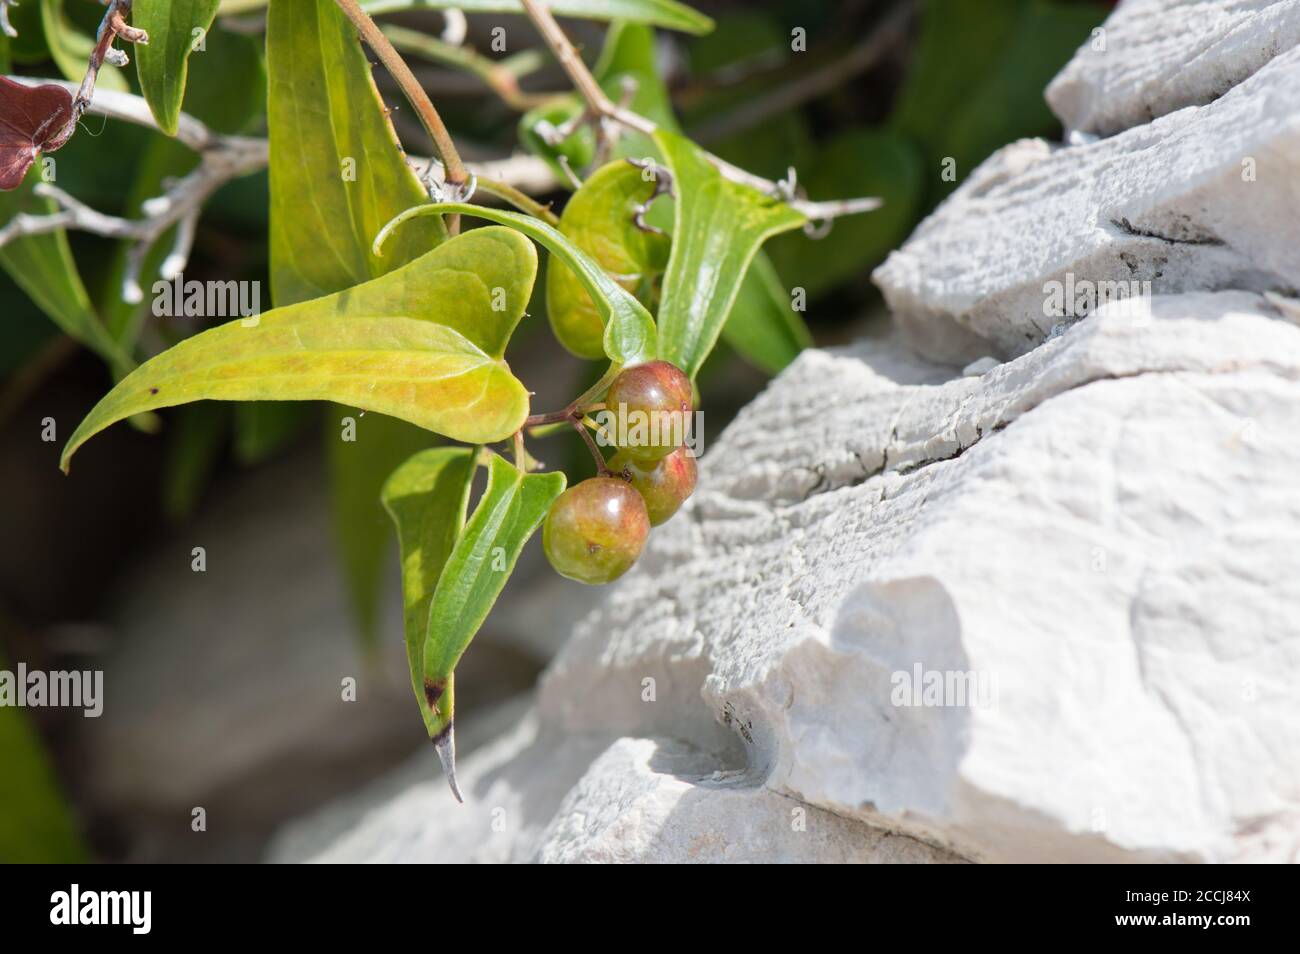 Common smilax plant with berries, lat. Smilax aspera, growing by the sharp rocks, heart-shaped leaves from Dalmatia, Croatia Stock Photo